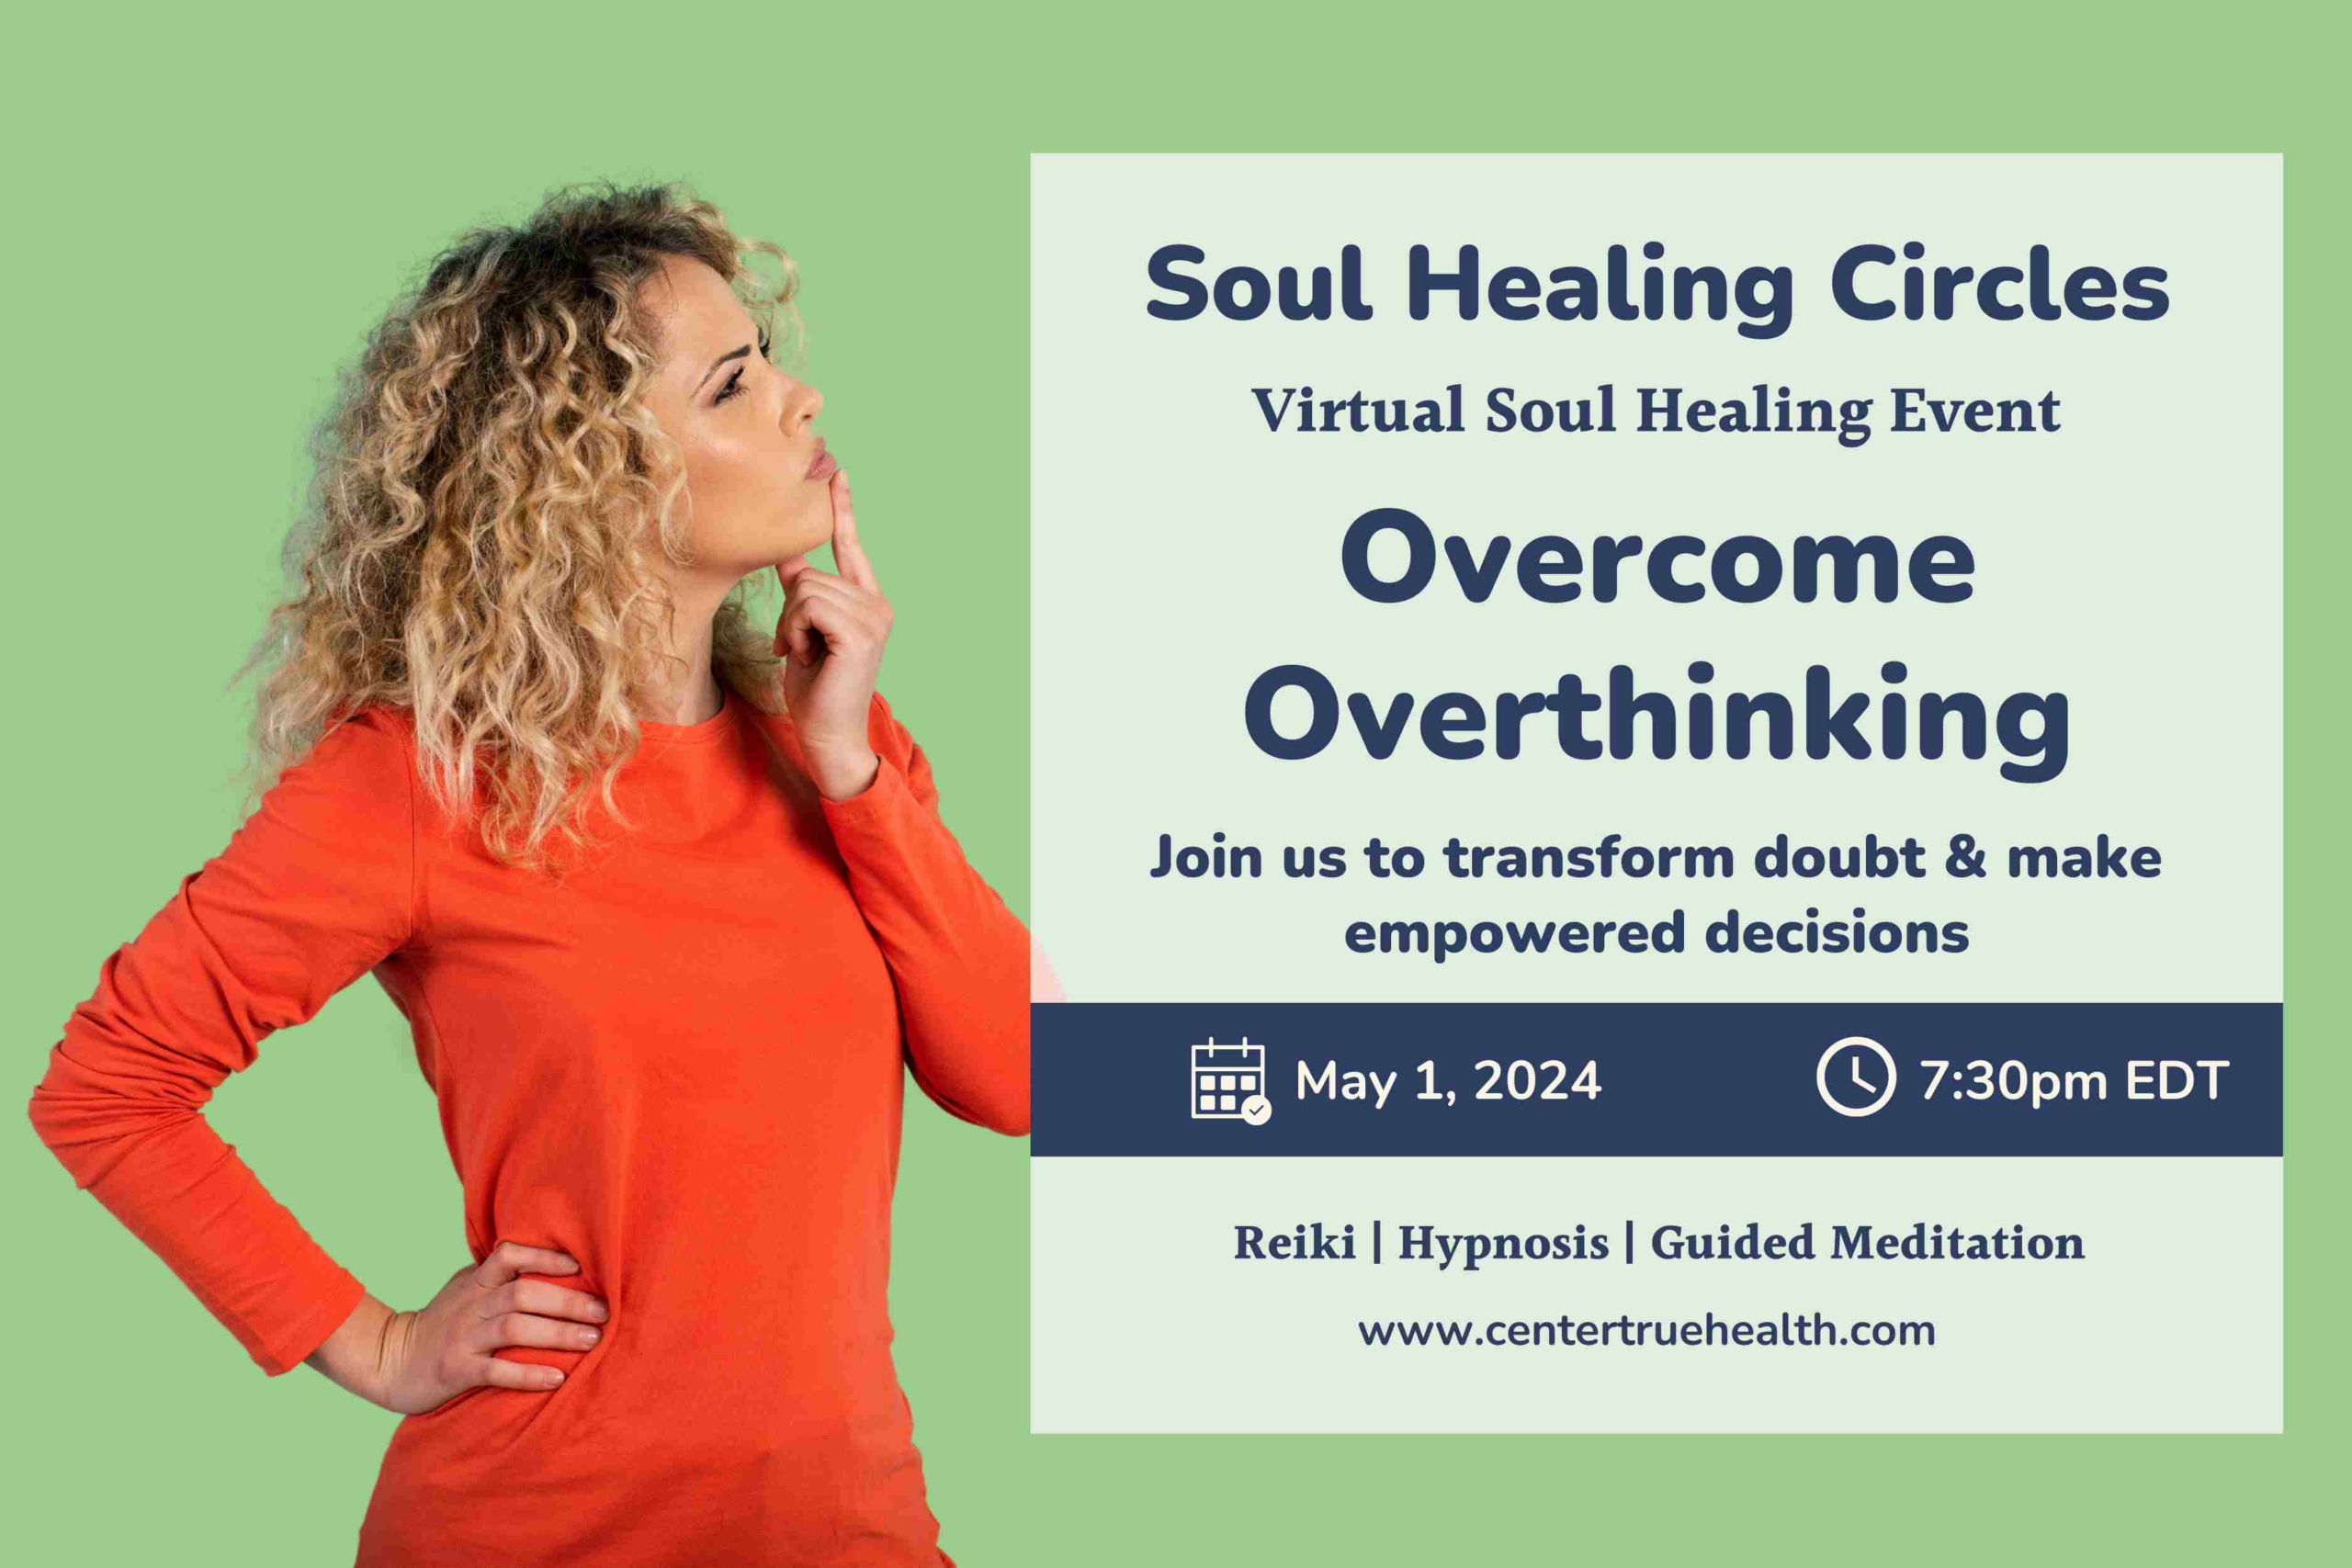 Virtual Soul Healing Circle to Overcome Overthinking & Make Decisions